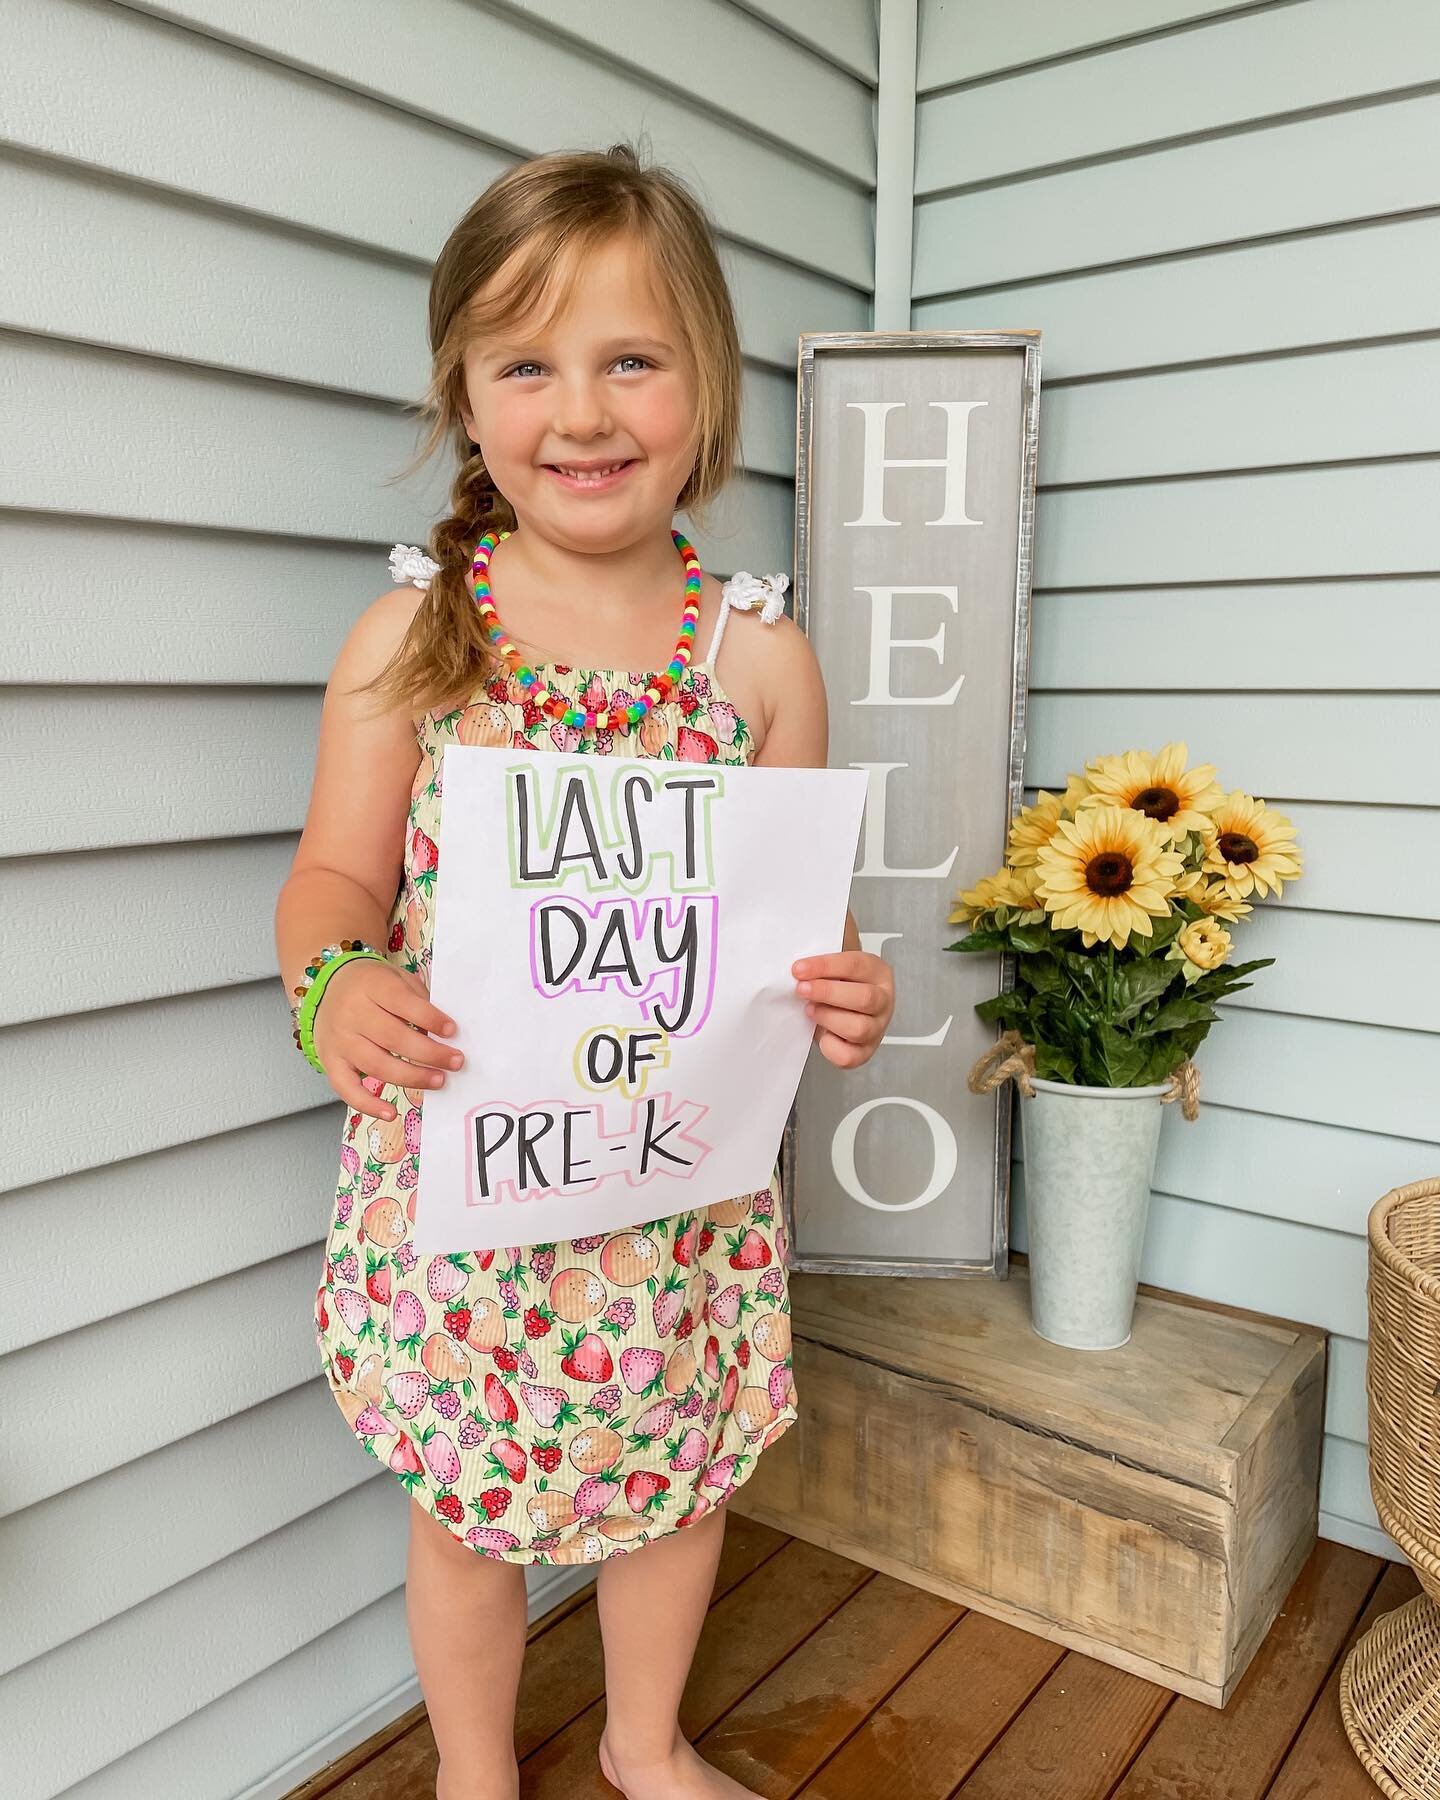 Well Sophie&rsquo;s last day of pre-k was today. We are so proud of her especially with moving across country and starting a new school mid year. She is a true ⭐️ and we love her so much!